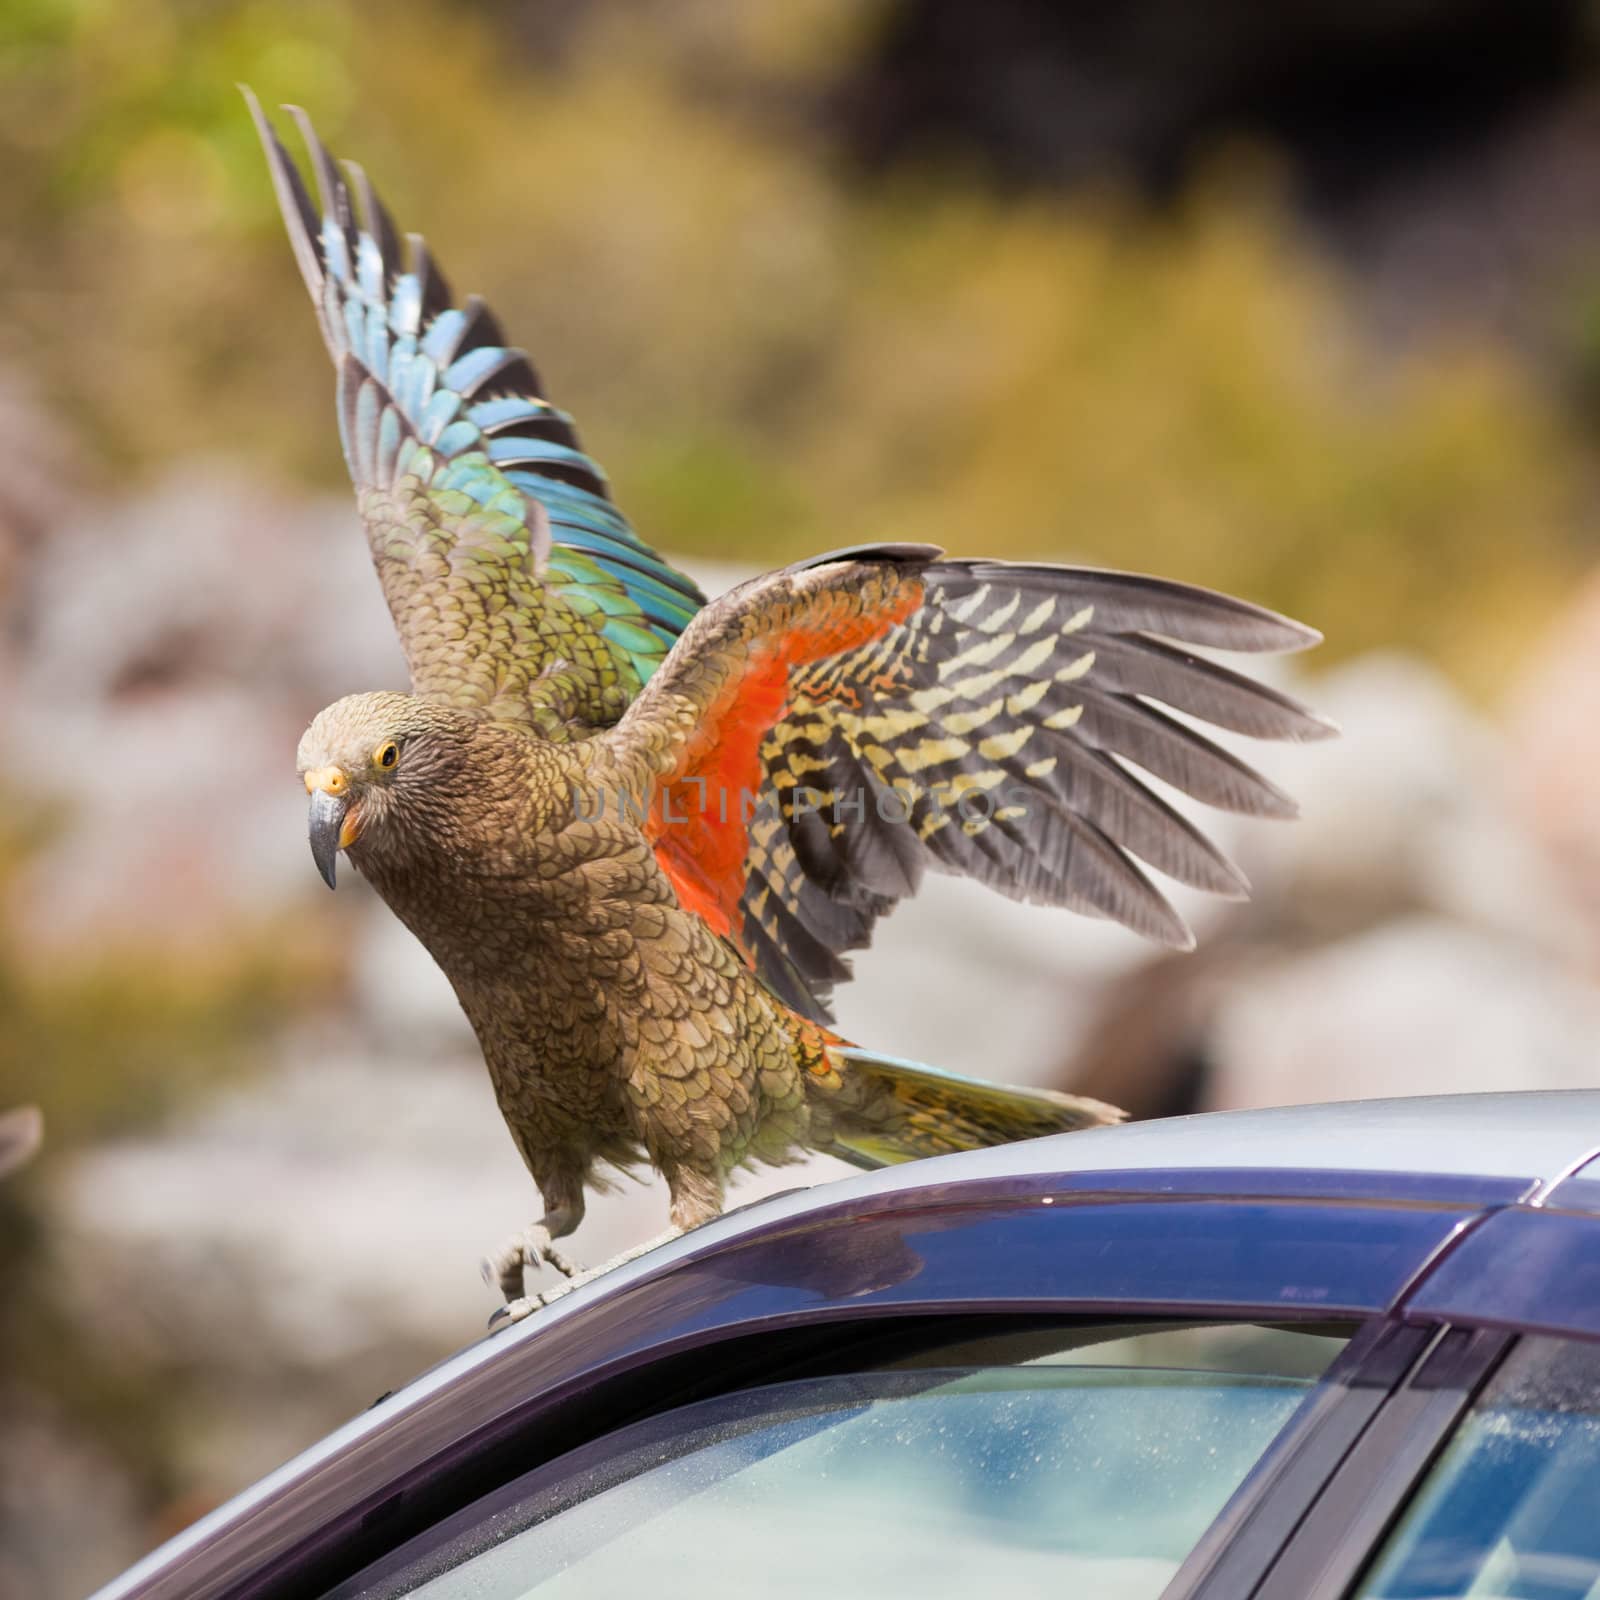 Endemic New Zealand alpine parrot Kea, Nestor notabilis, trying to vandalize rubber from a parked vehicle